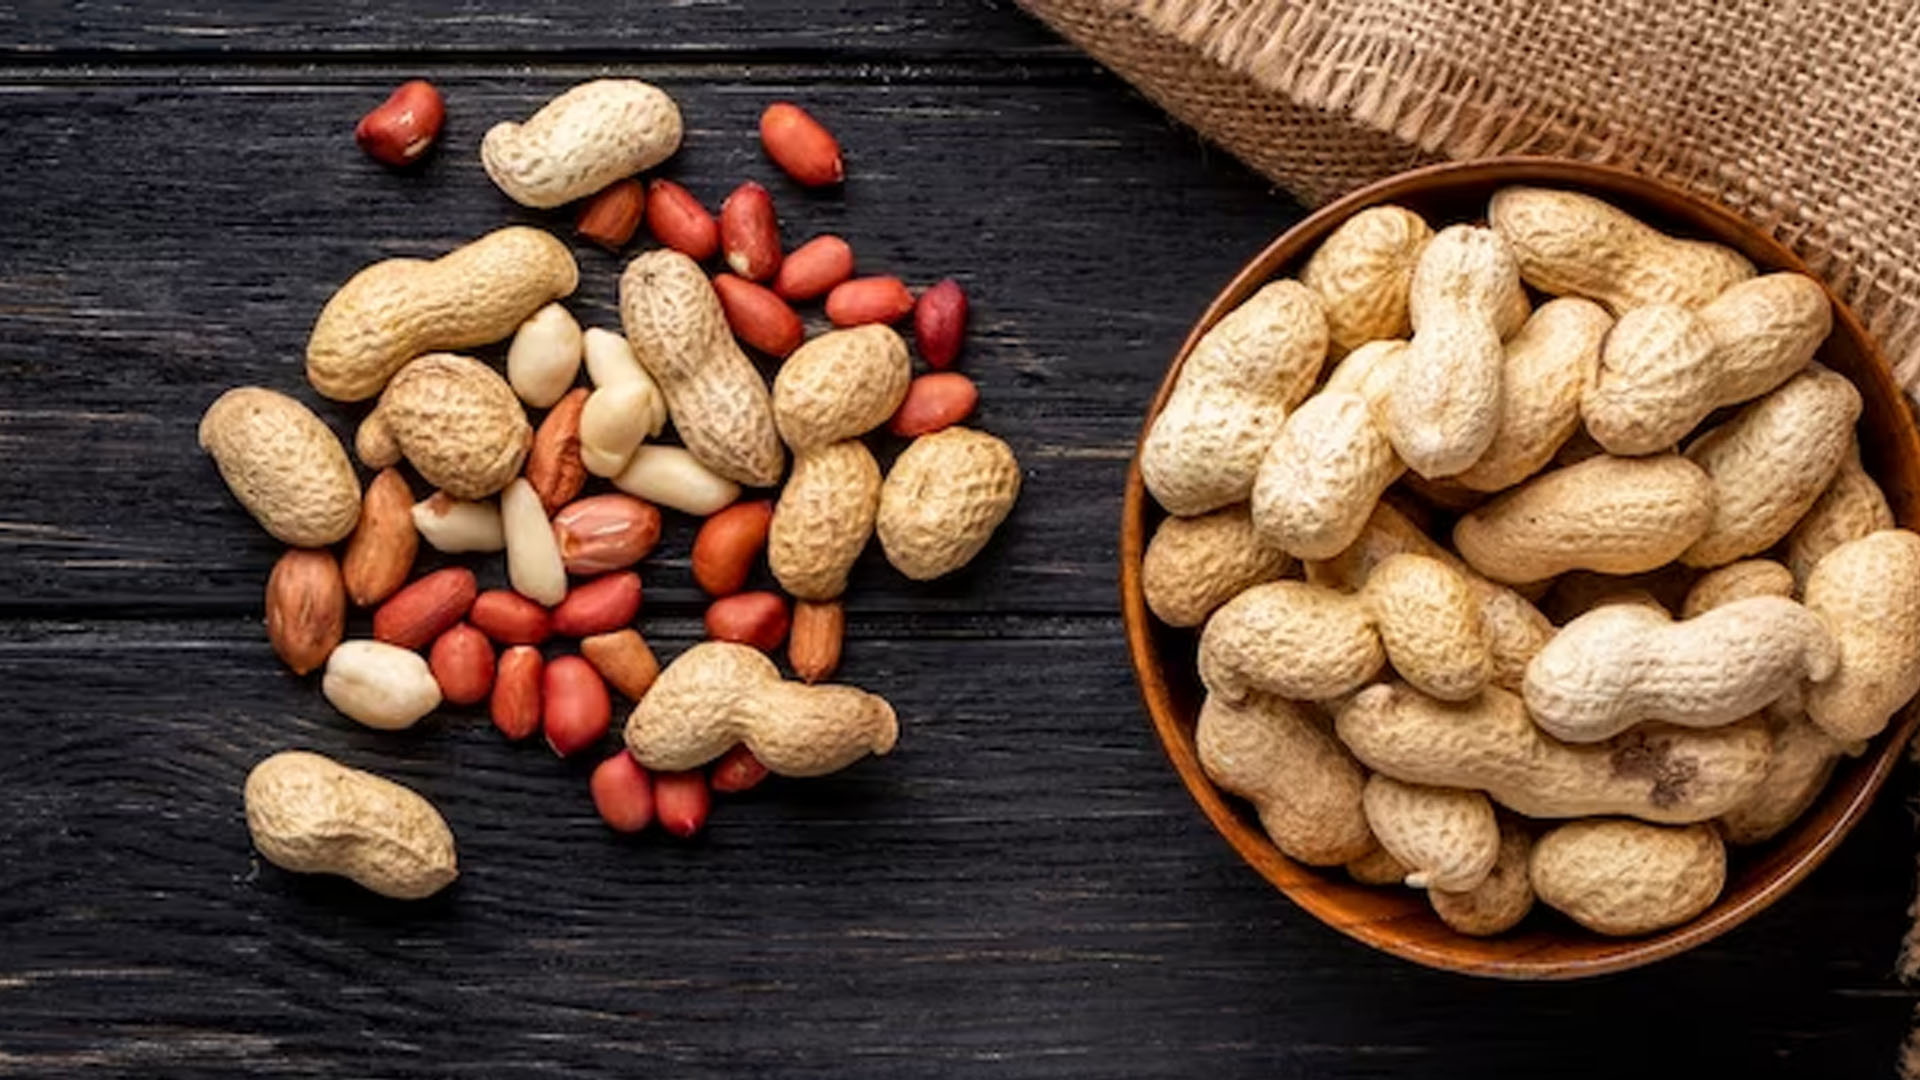 What Are The Health Benefits of Groundnuts?